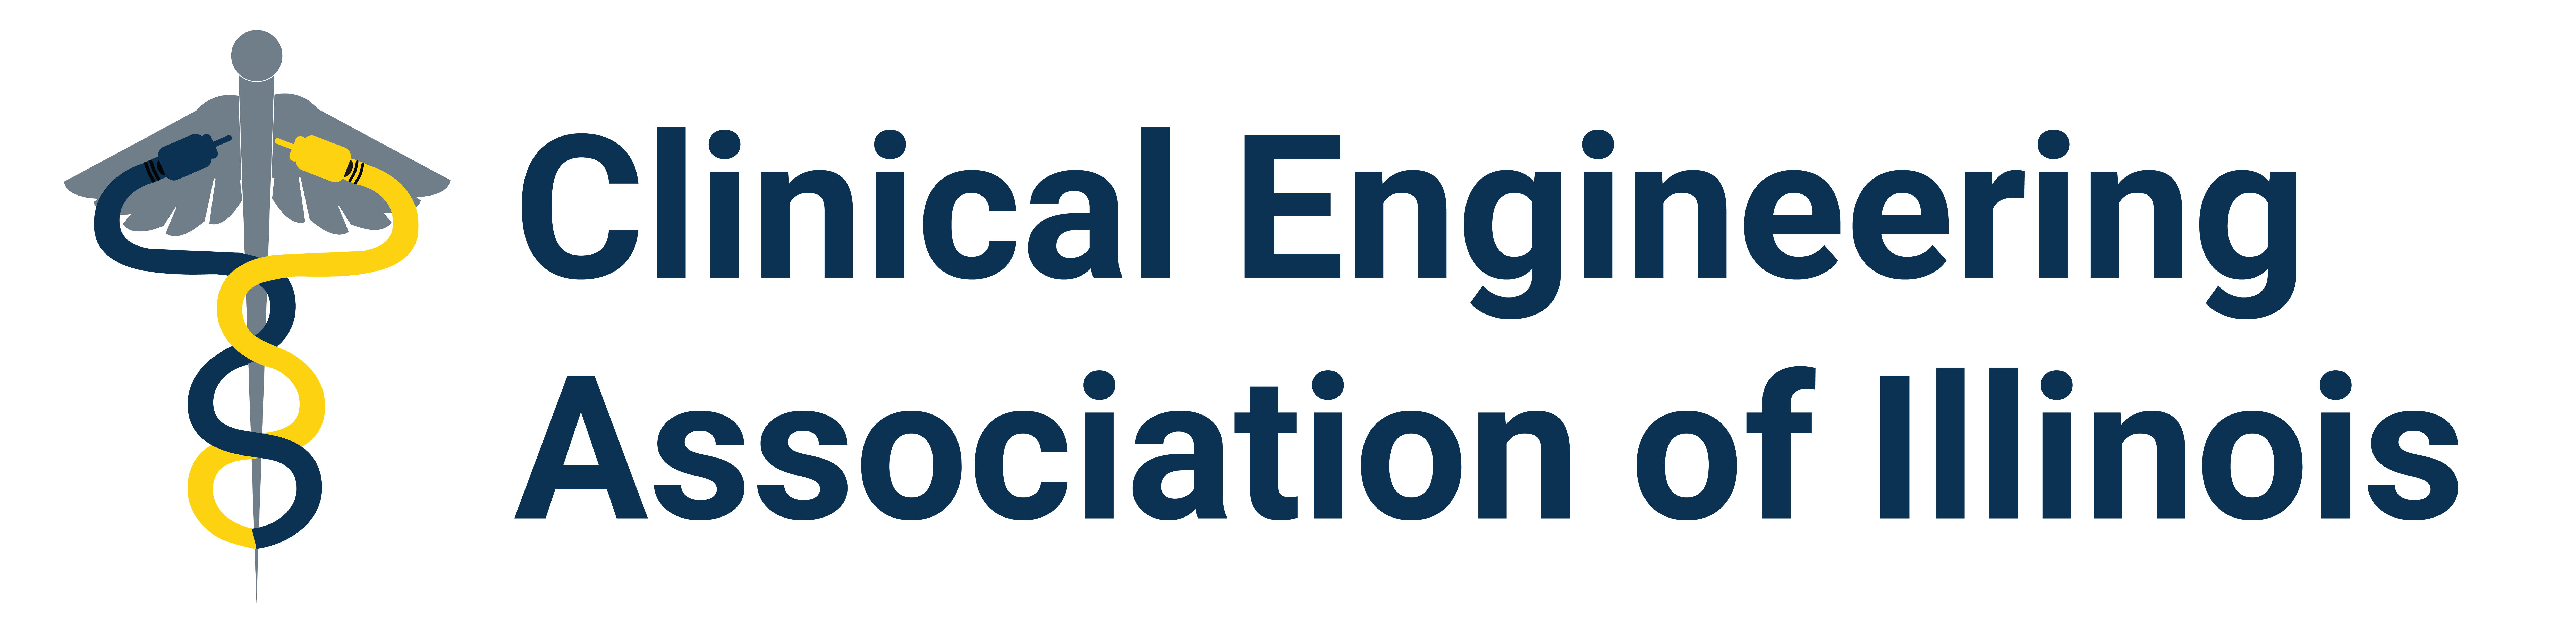 Clinical Engineering Association of Illinois